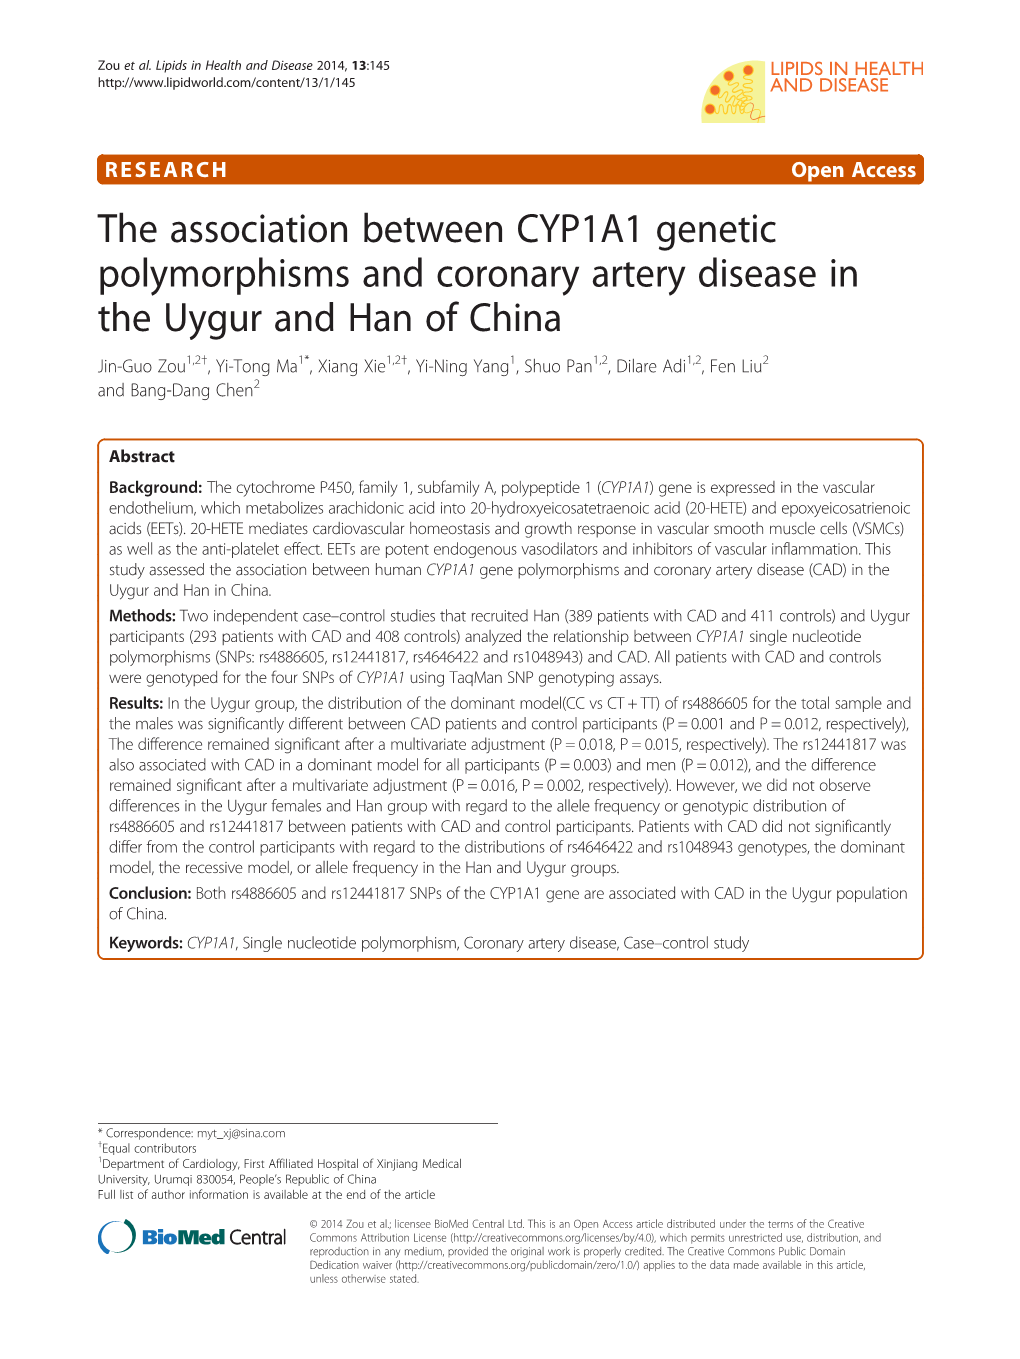 The Association Between CYP1A1 Genetic Polymorphisms And